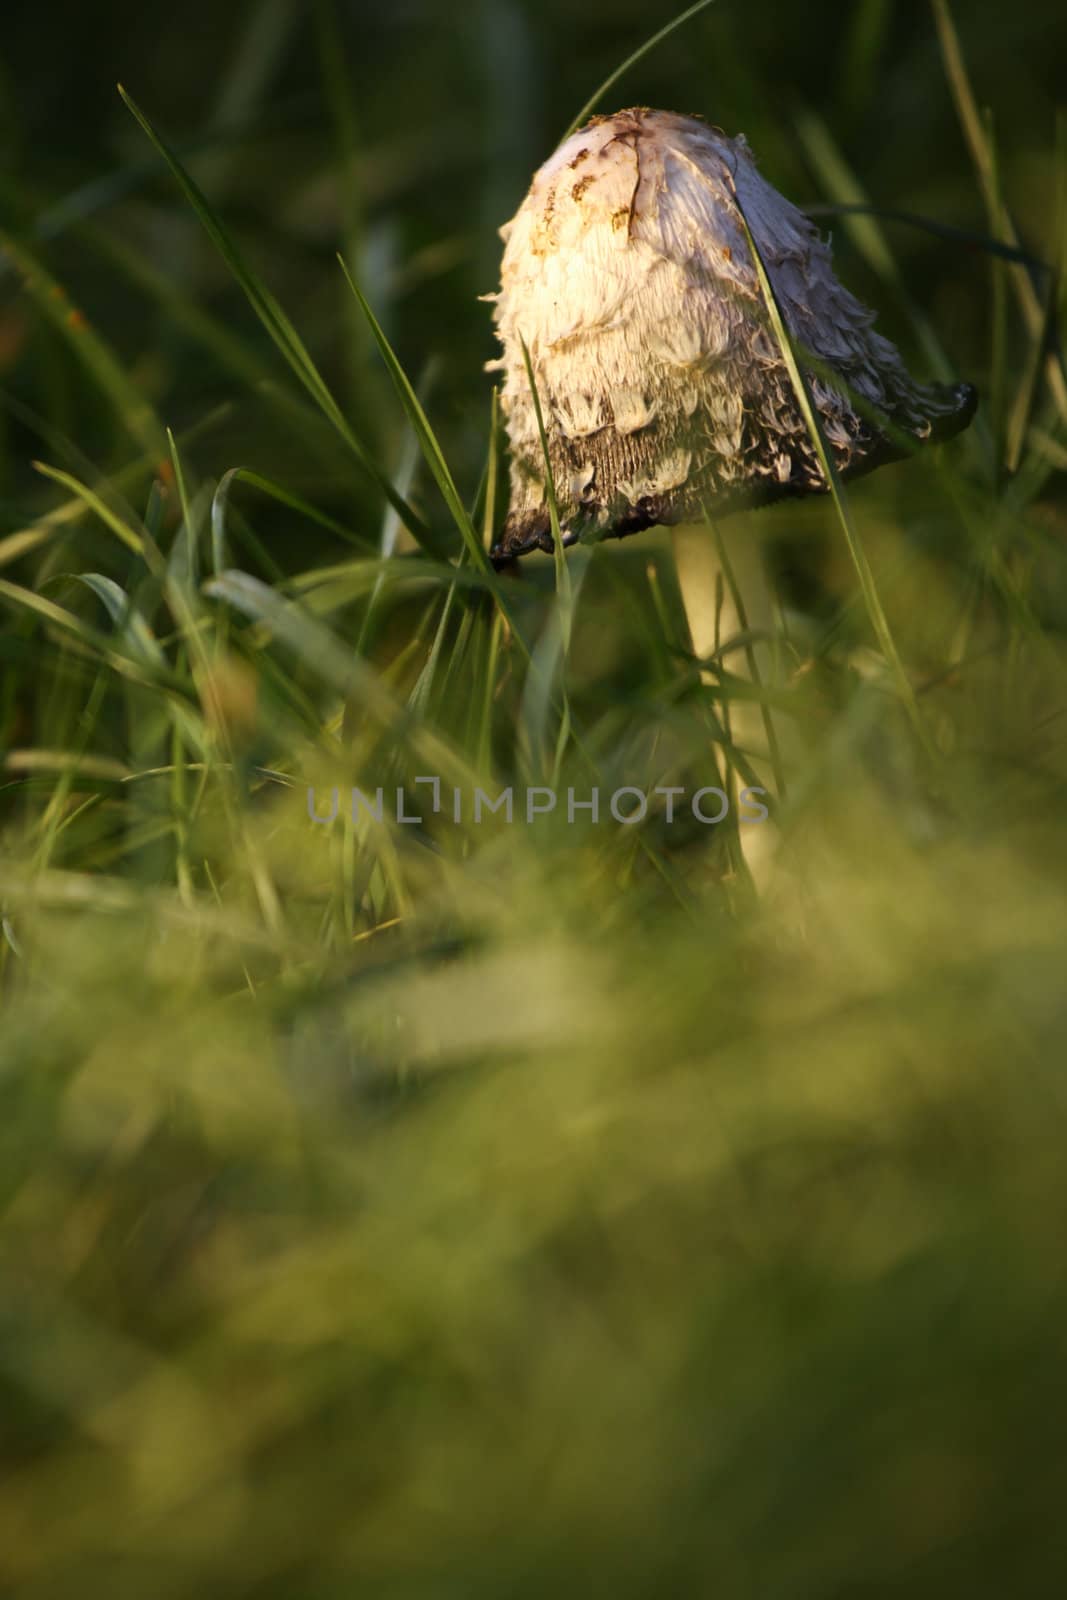 White poisonous mushroom growing among blades of grass with depth of field